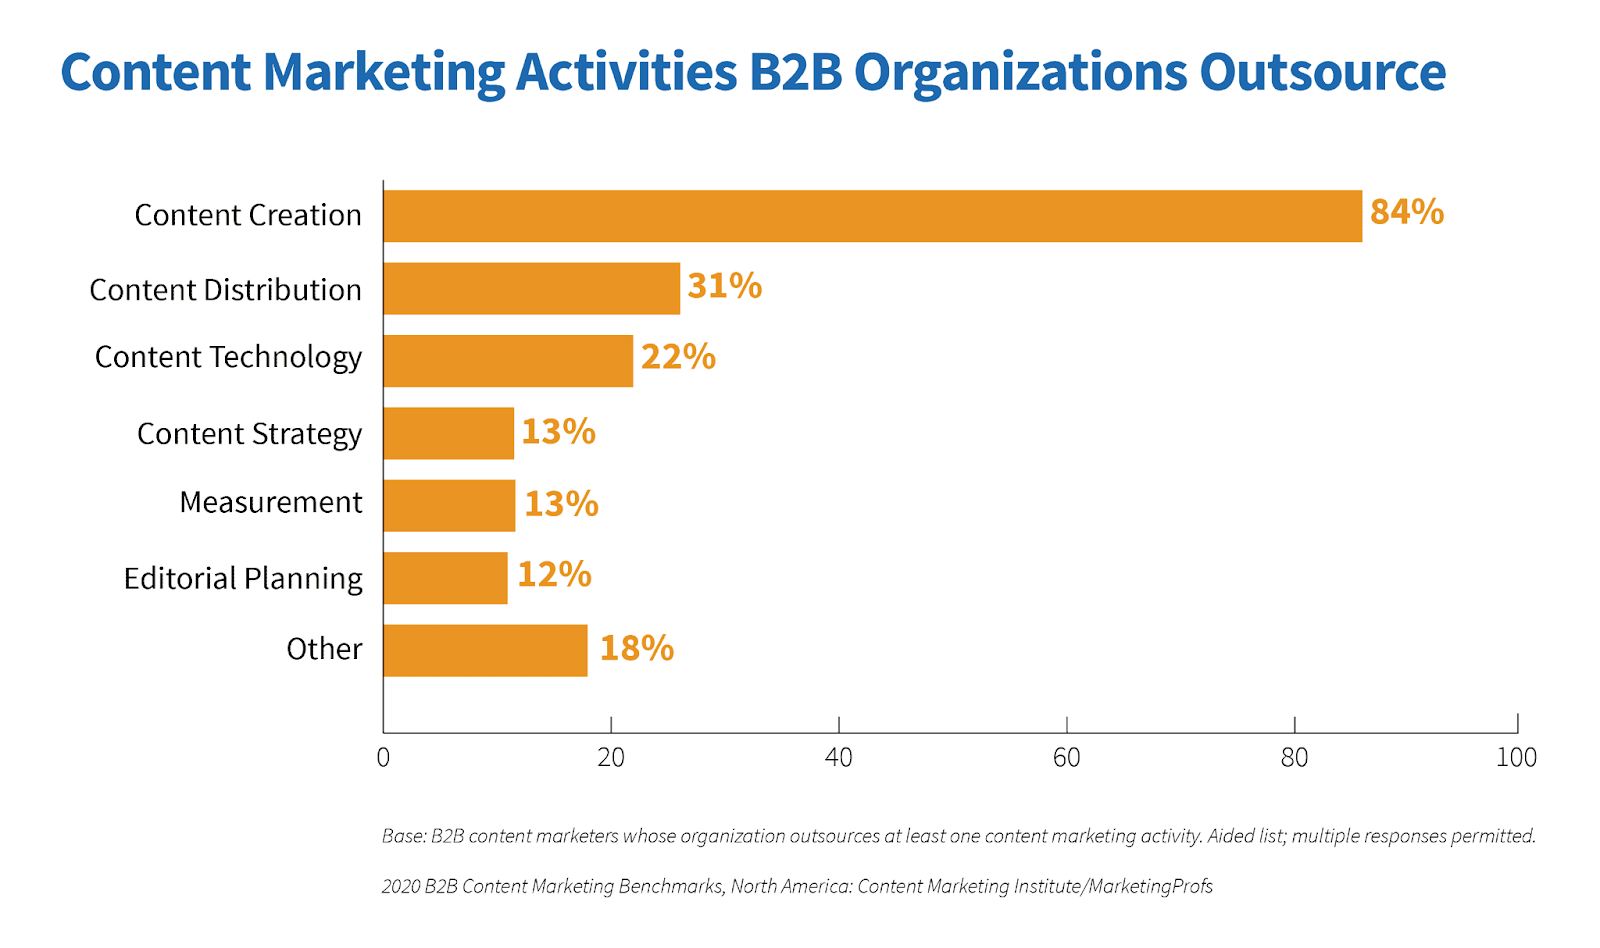 Bar chart showing the content marketing activities that B2B organizations outsource, including 84% for content creation.